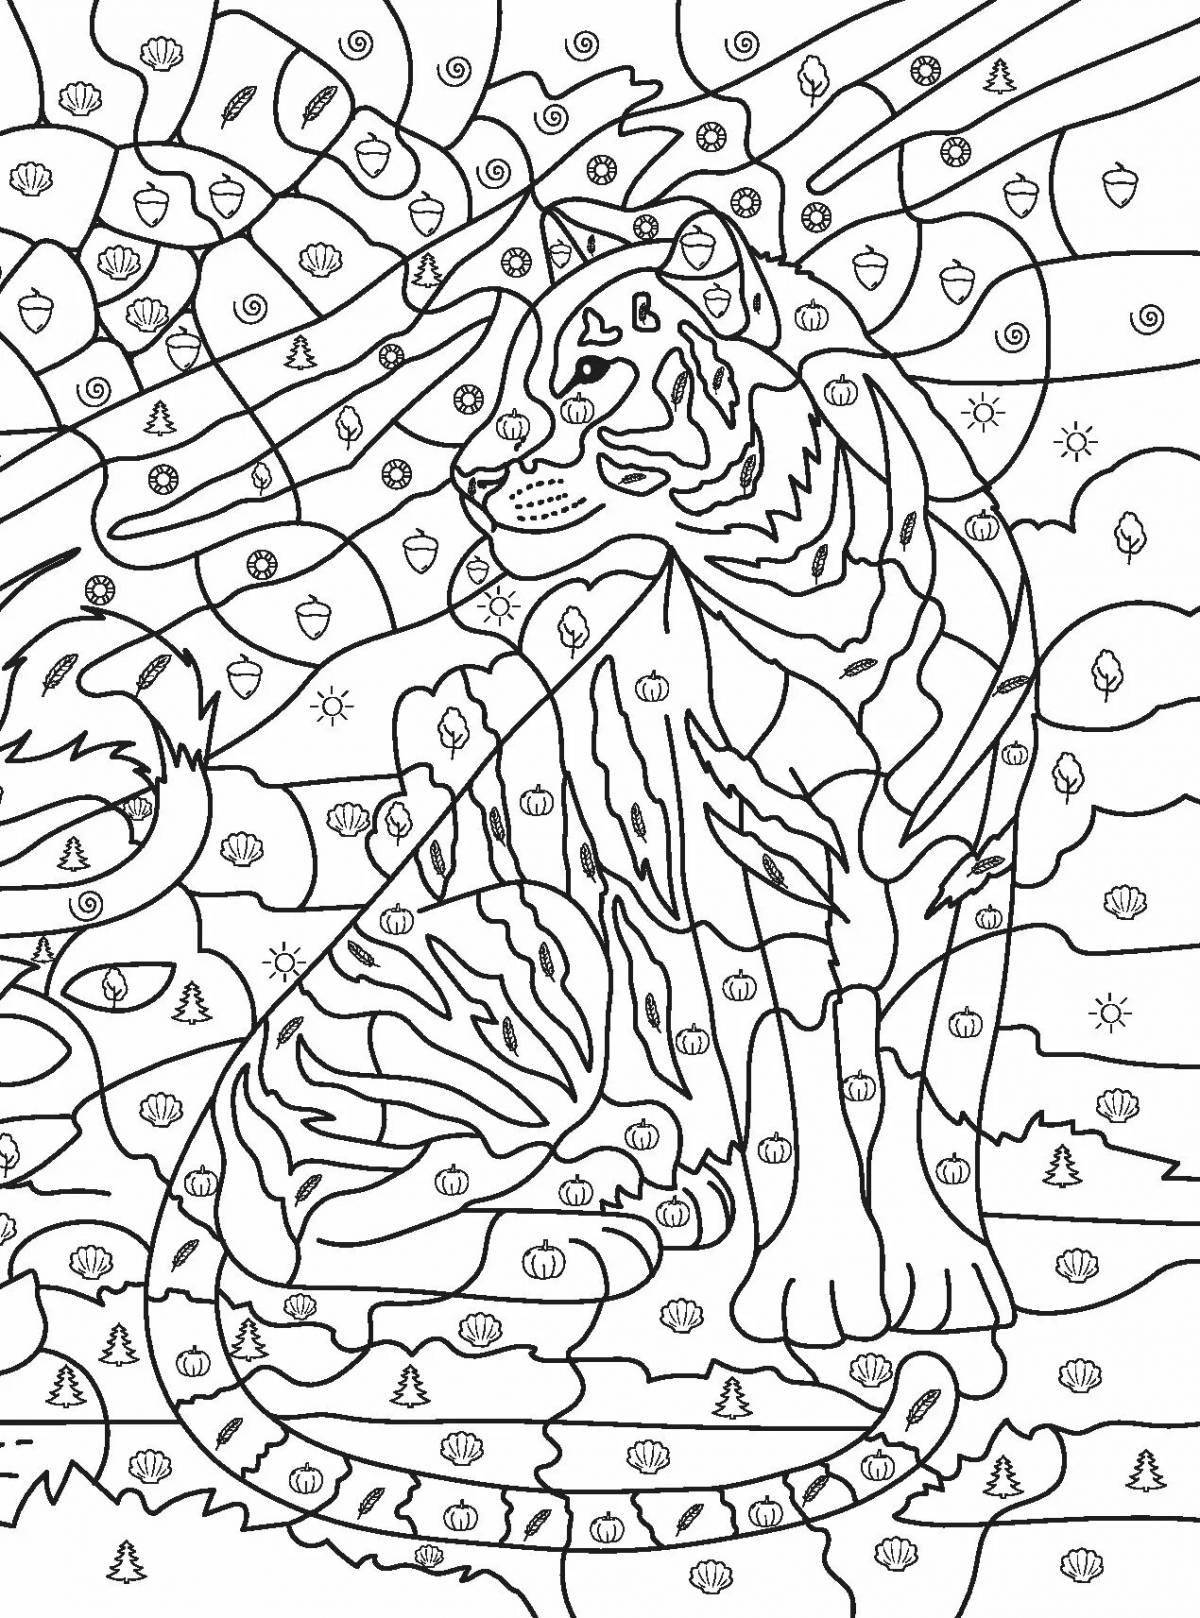 Fun coloring book by numbers